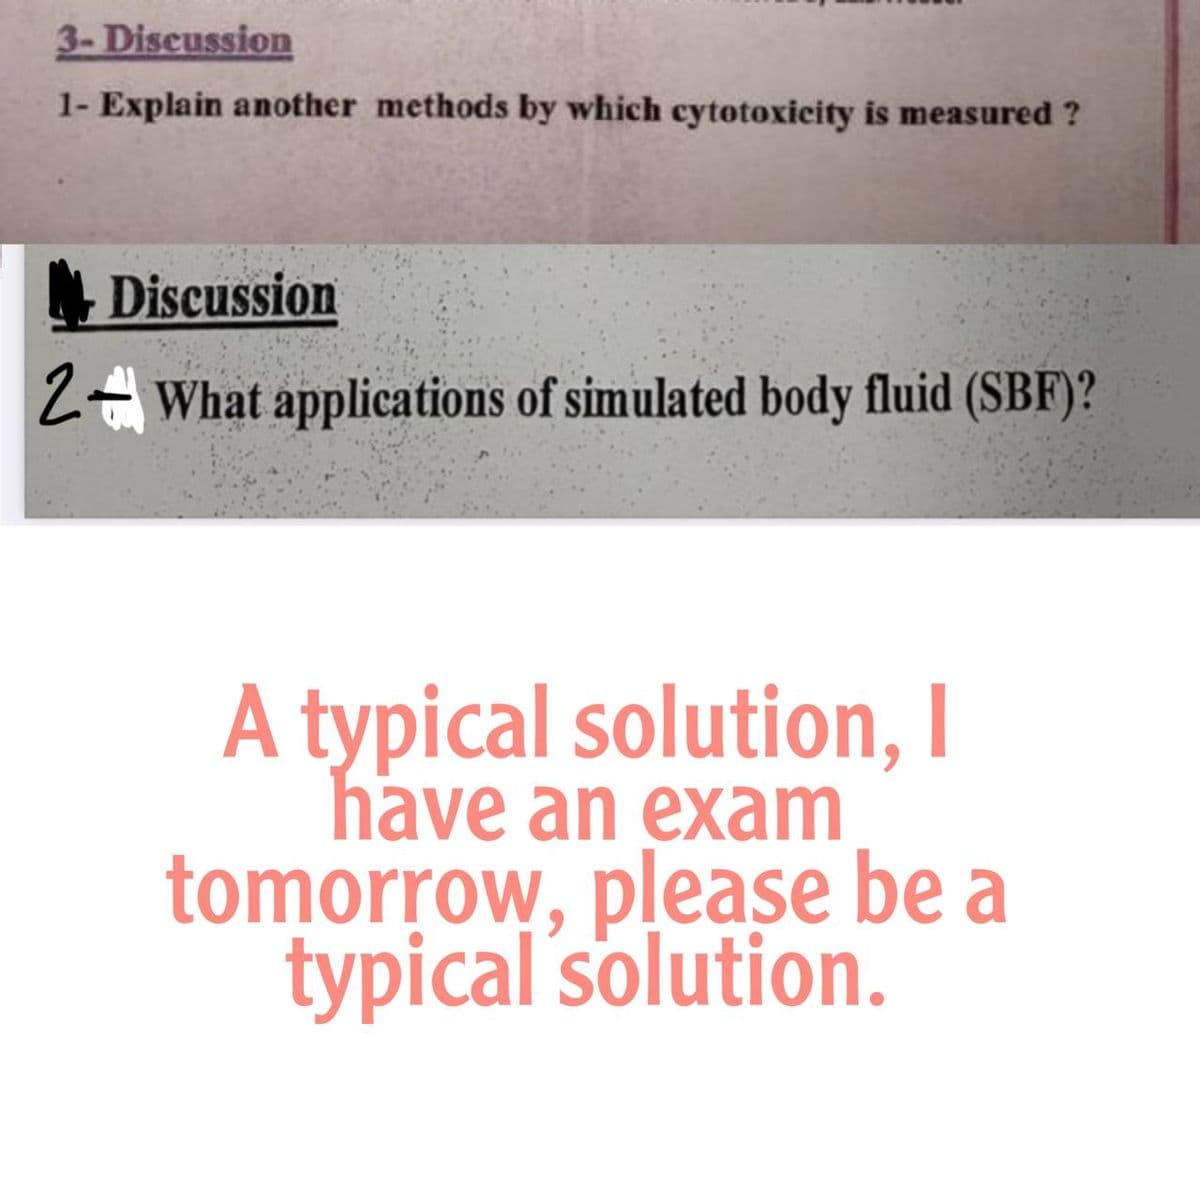 3- Discussion
1- Explain another methods by which cytotoxicity is measured ?
Discussion
2- What applications of simulated body fluid (SBF)?
A typical solution, I
have an exam
tomorrow, please be a
typical solution.